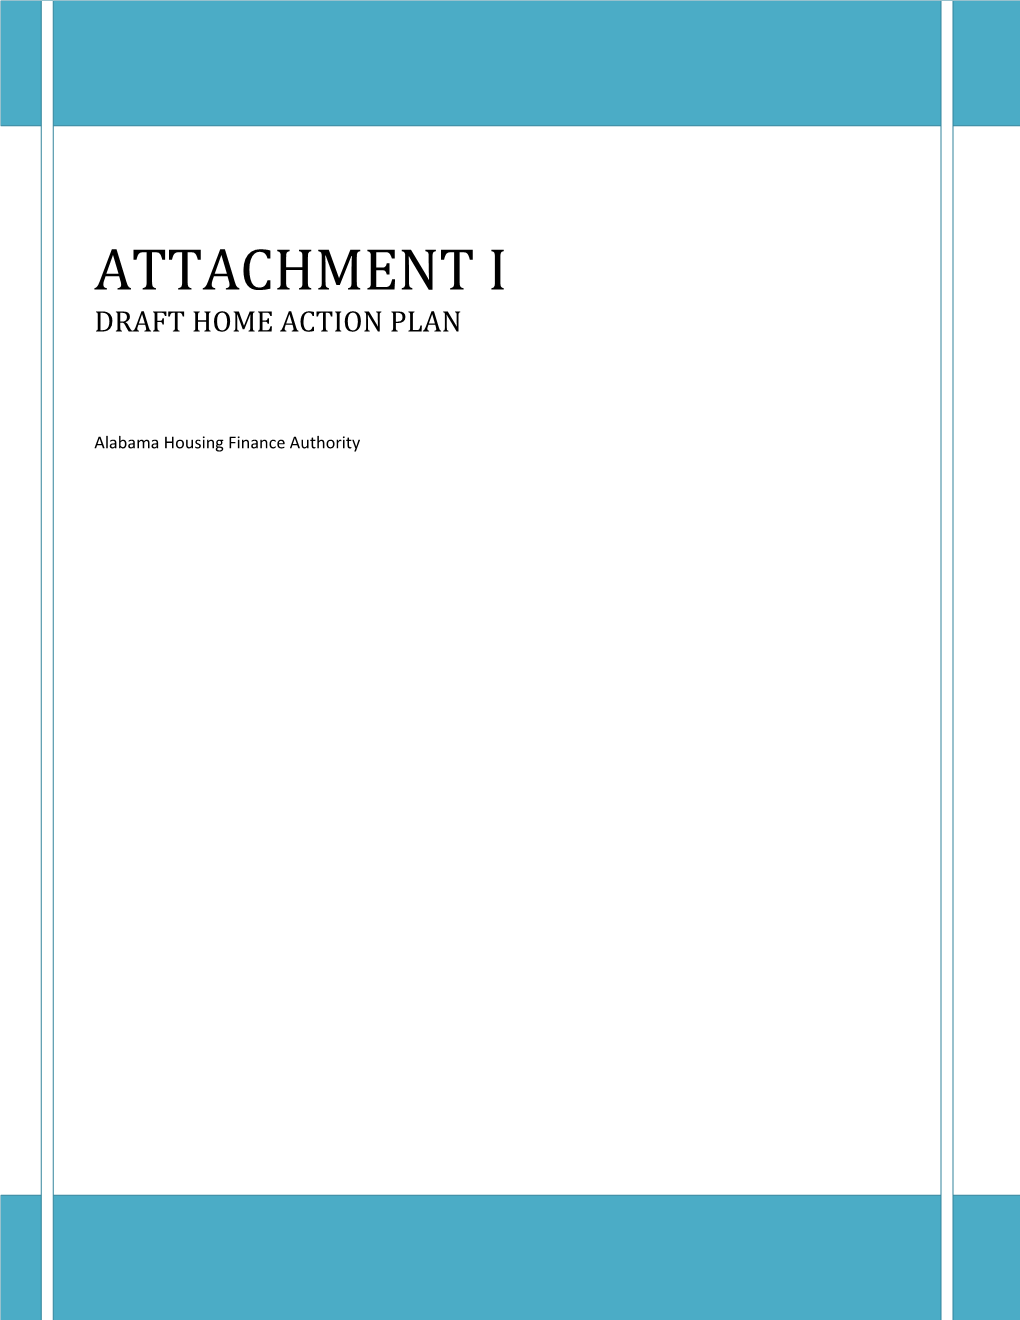 Attachment I HOME Action Plan